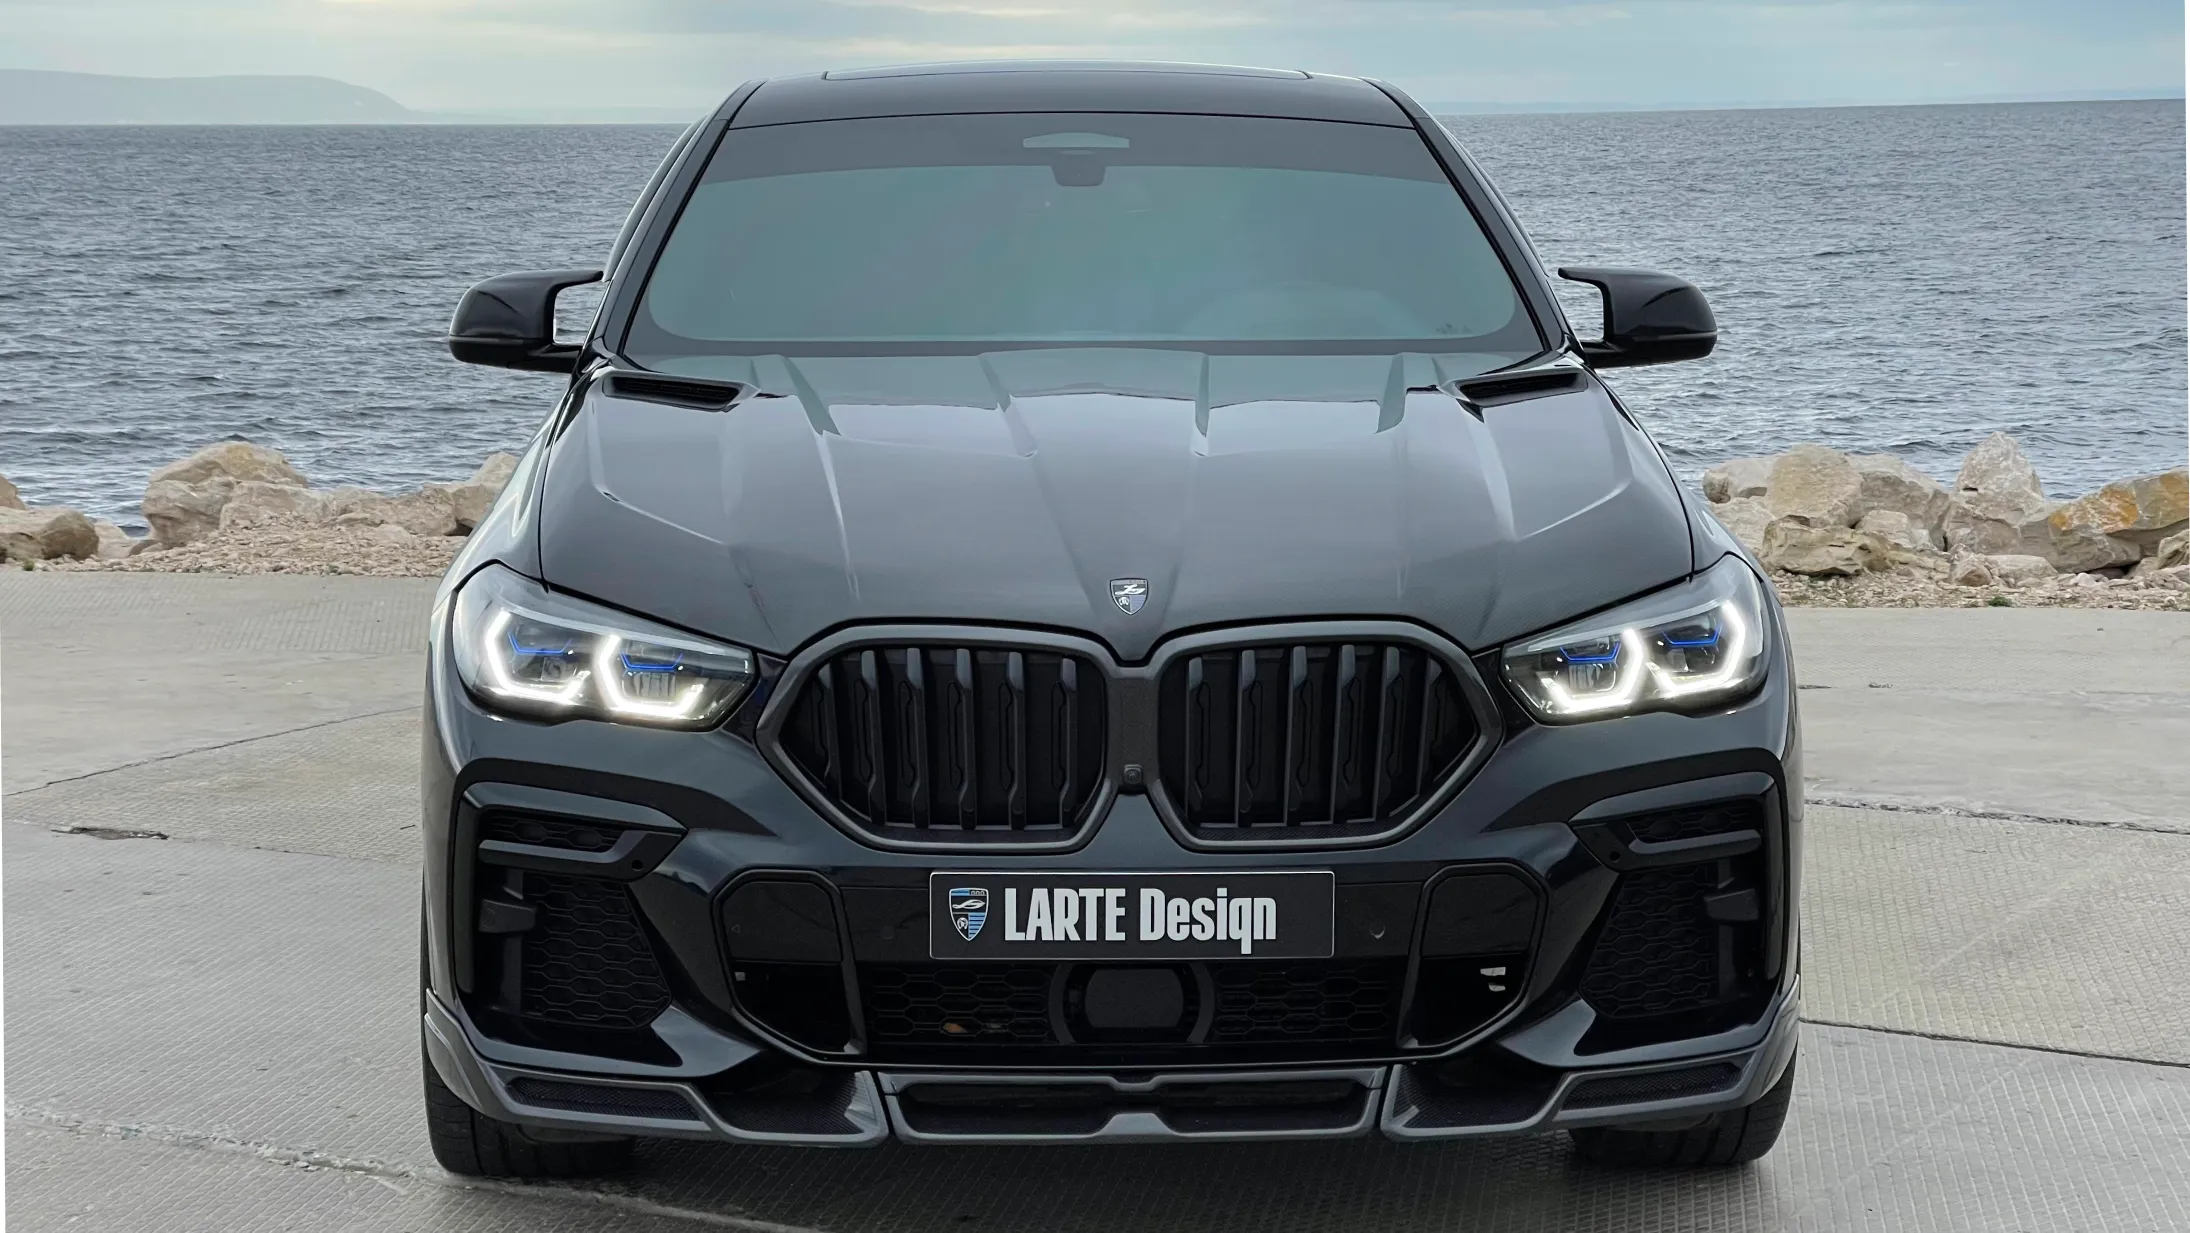 Front view on a BMW X6 with a body kit giving the car a custom appearance